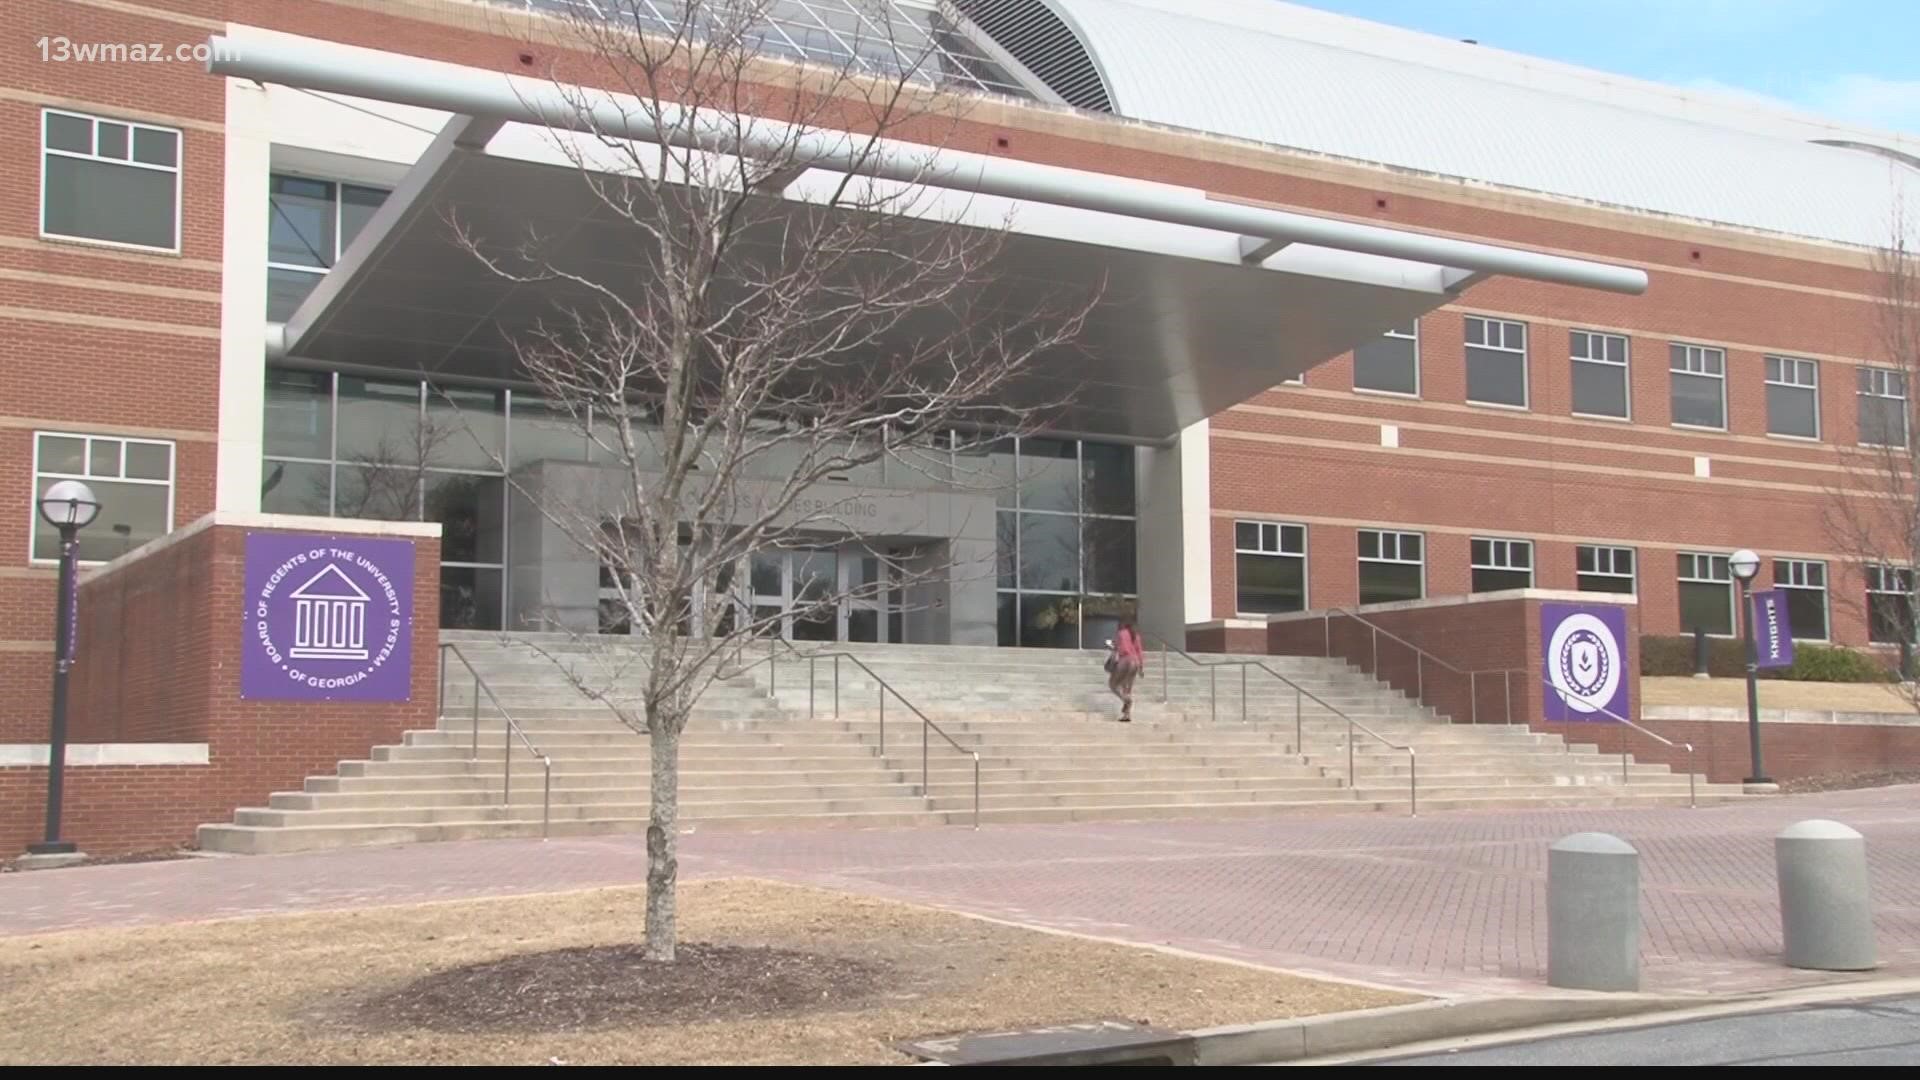 One of the largest drops happened at Middle Georgia State University, but they say they're already seeing an enrollment boom for next year.